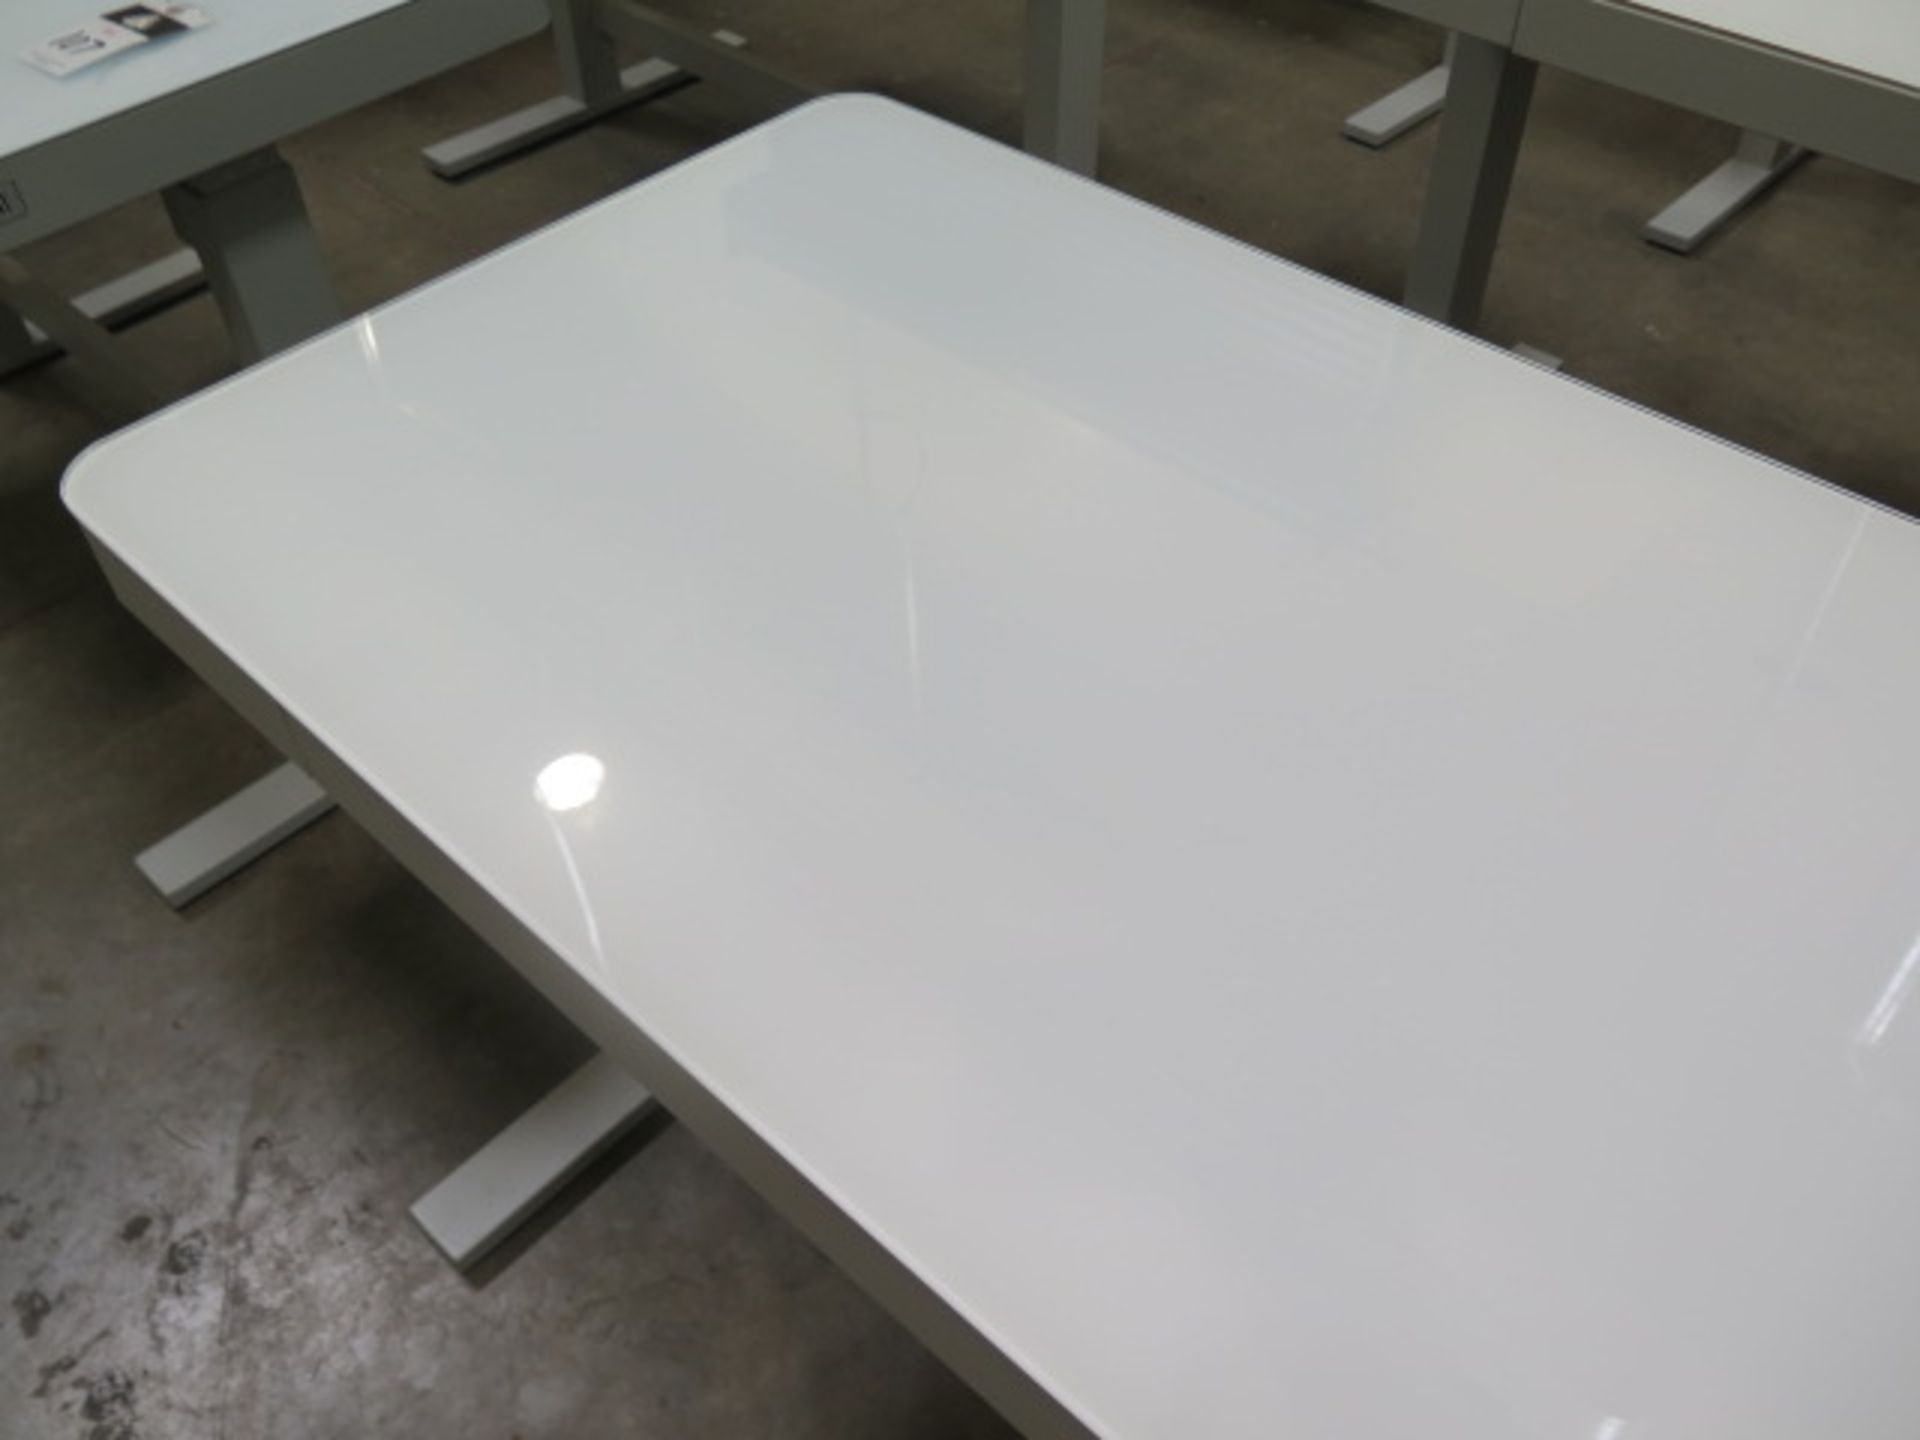 2018 Twin Star International Style MS Motorized Elevating Desks w/ Tempered Glass Top, SOLD AS IS - Image 3 of 6